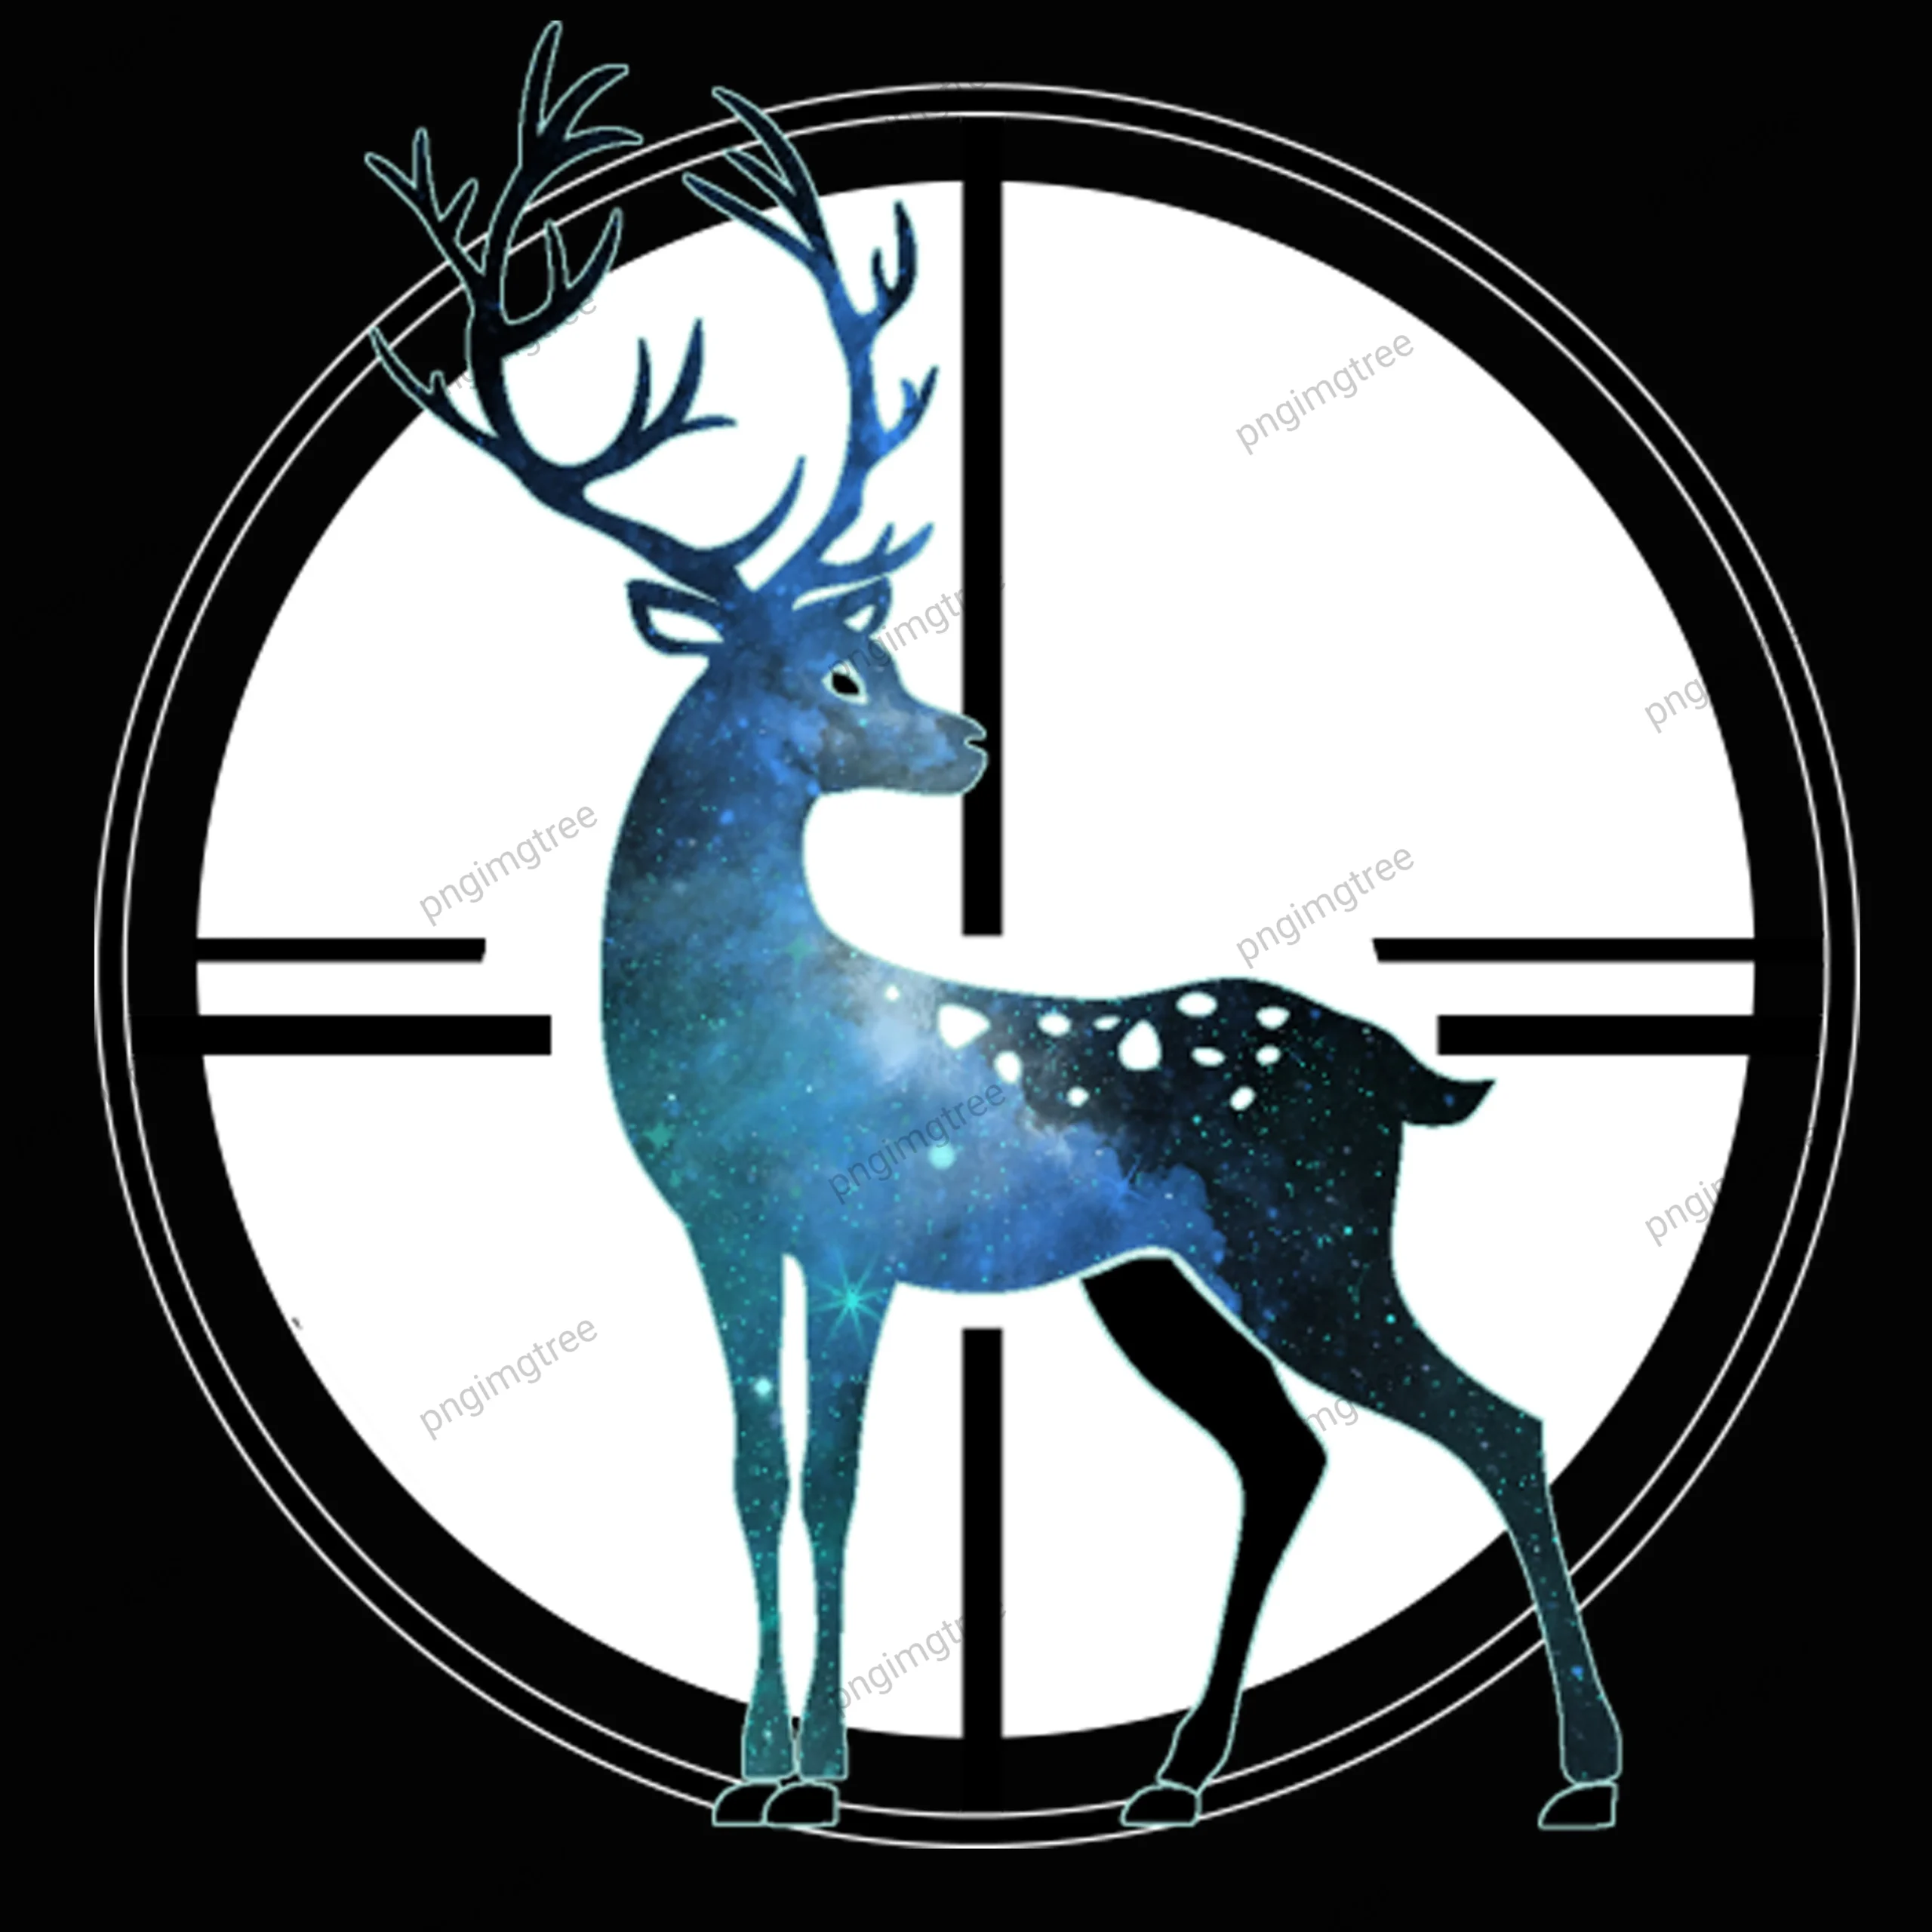 Blue galactic black-horned deer within a circle on a black background